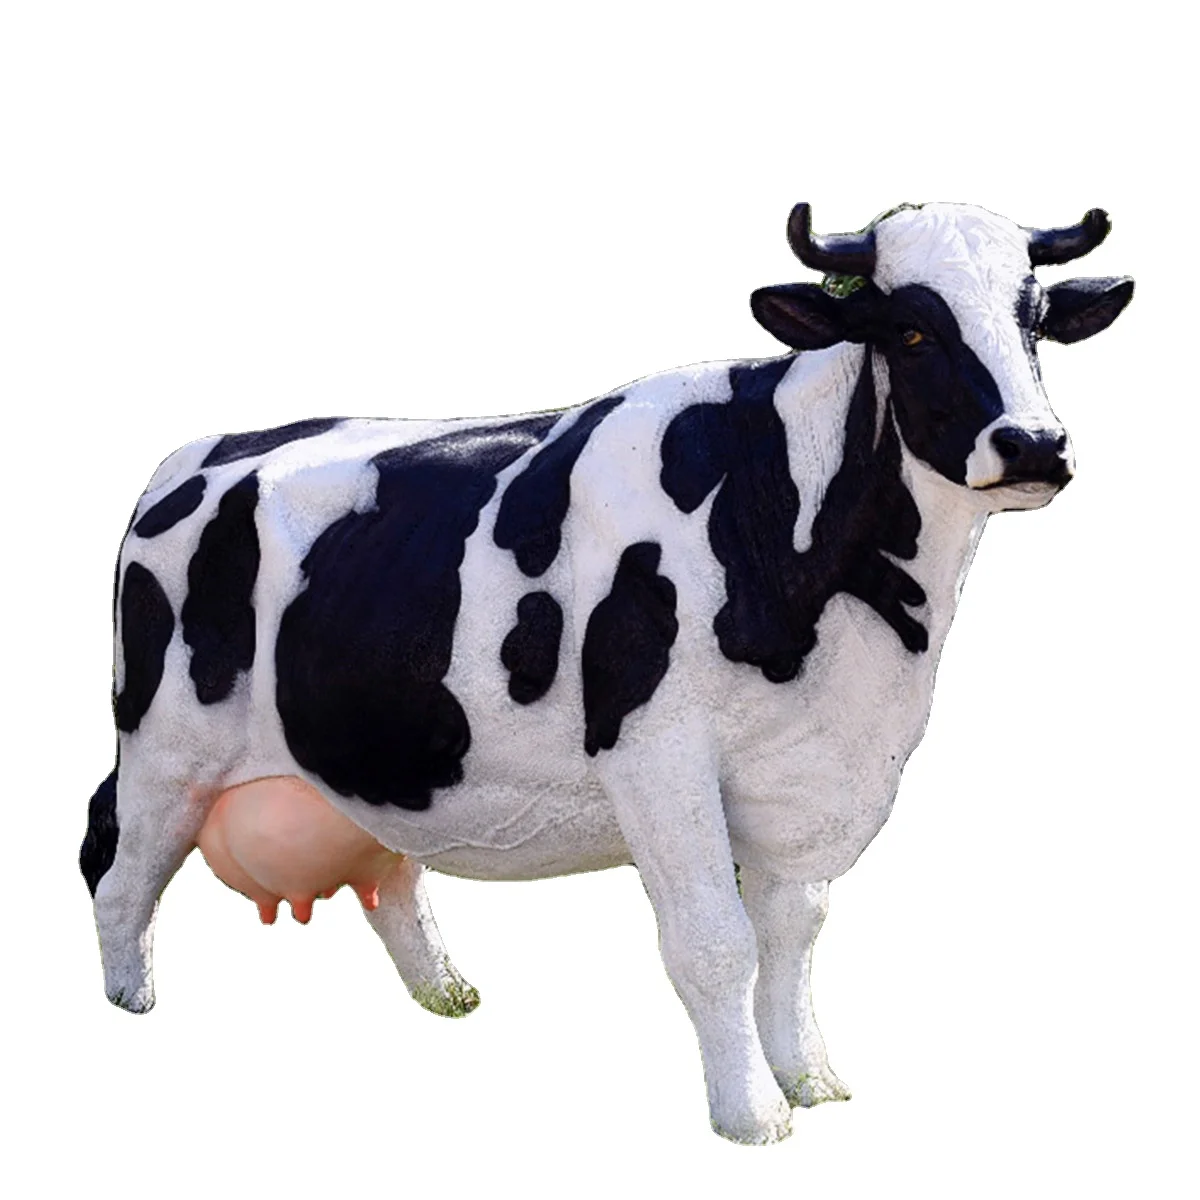 Outdoor Decorations & Indoor Props-Farm Animal Resin Yard Lawn Decorations Life-Size Cow Statue for Indoor & Outdoor Use